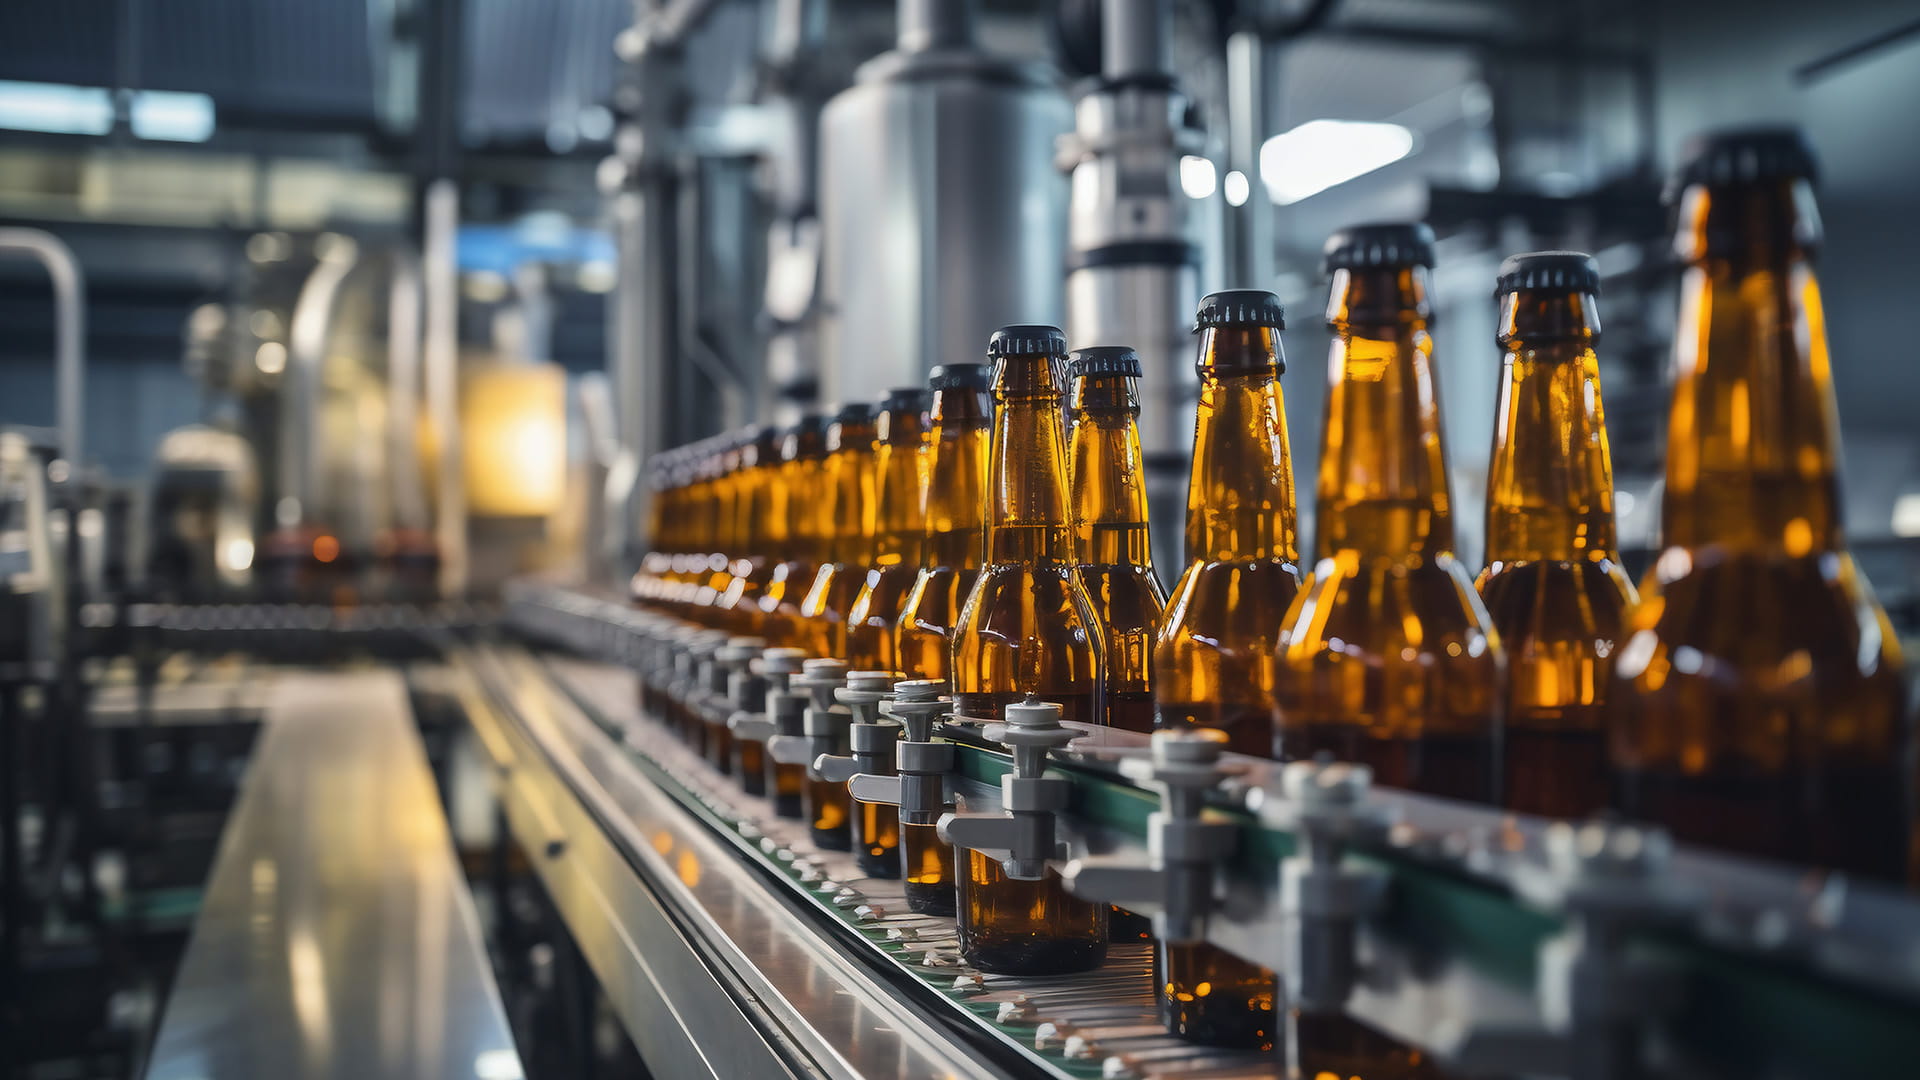 Supporting one of world's largest brewers in their journey to net zero by decarbonisation strategies, engineering, and implementation of technologies. 